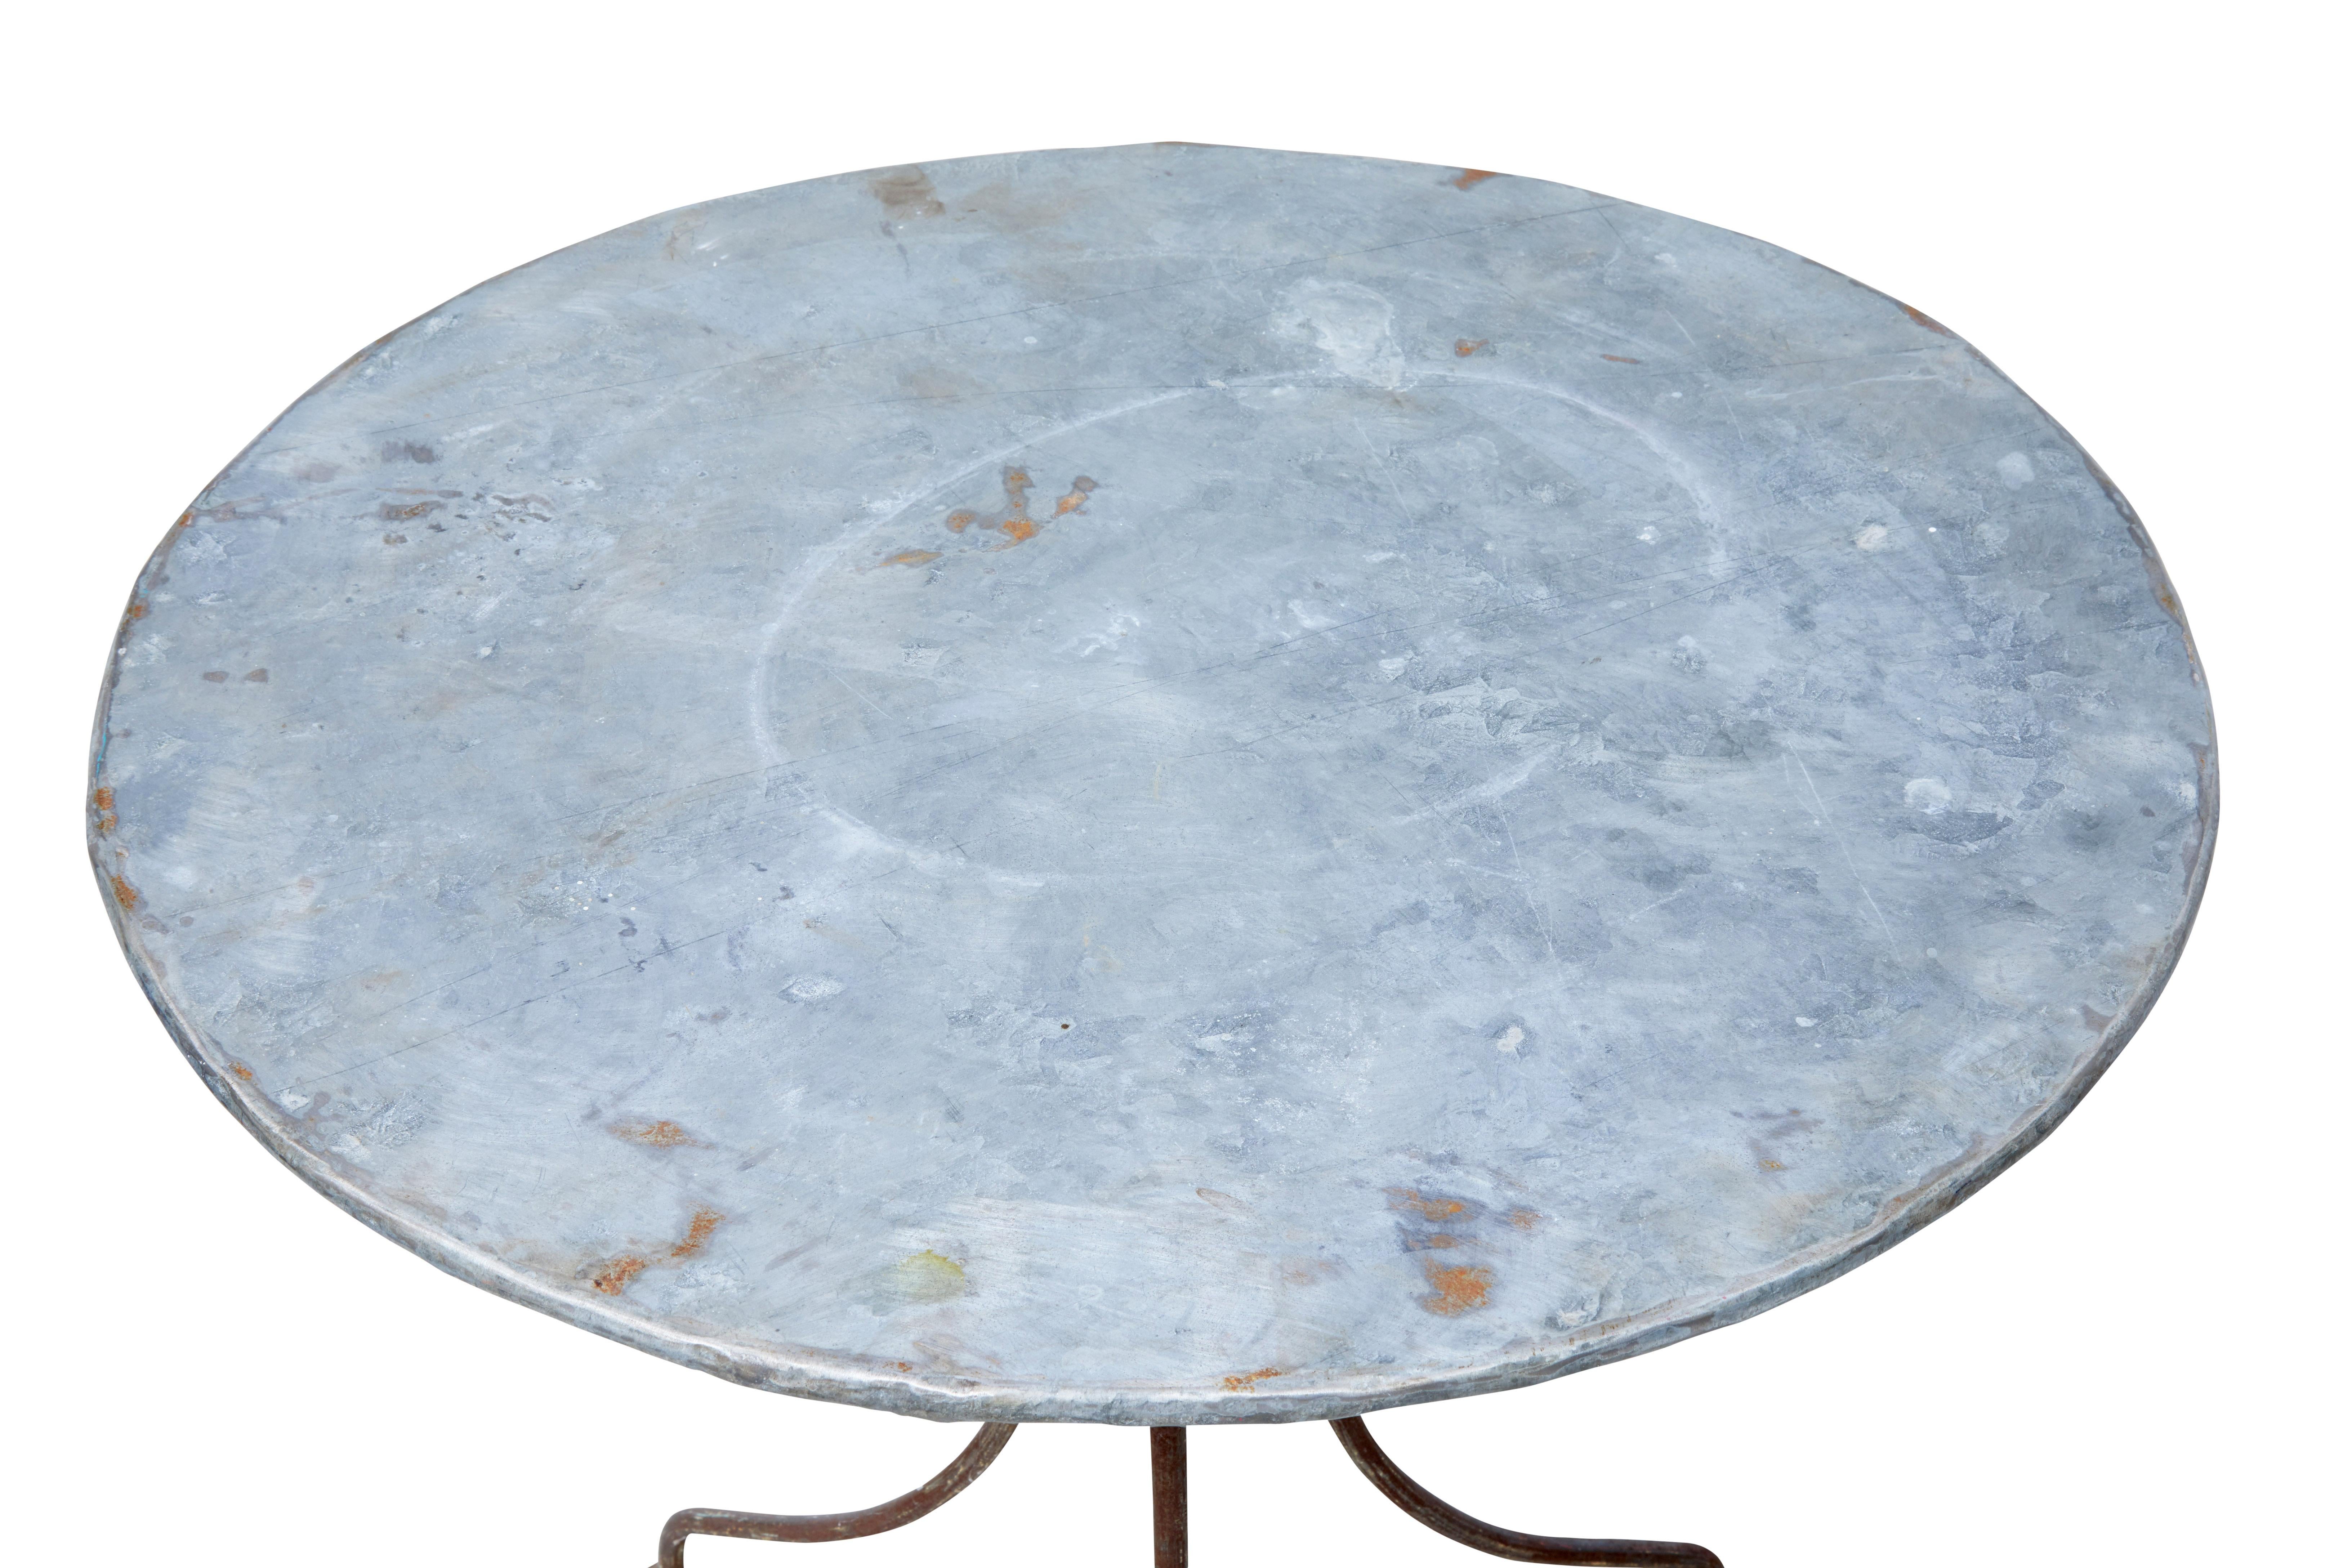 Good quality round metal occasional table from the 1920s.

Galvanised round top and steel shaped base. Ideal for use as a garden table or lamp table.

Traces of original paint to base, obvious signs of use to the top surface.